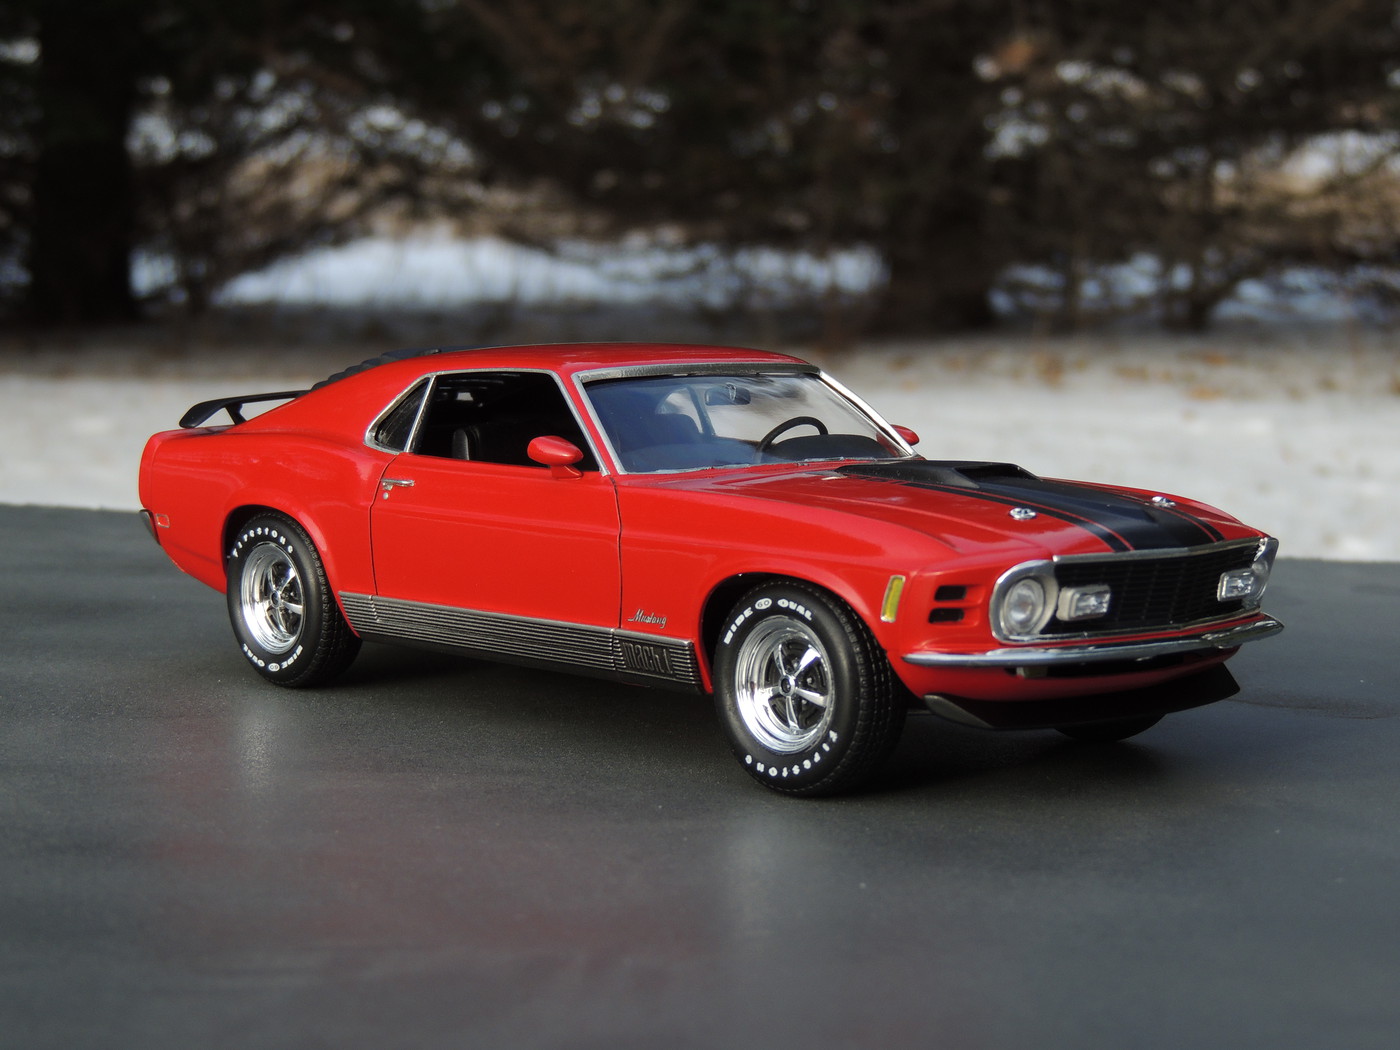 1970 Ford Mustang Mach 1 - Model Cars - Model Cars Magazine Forum